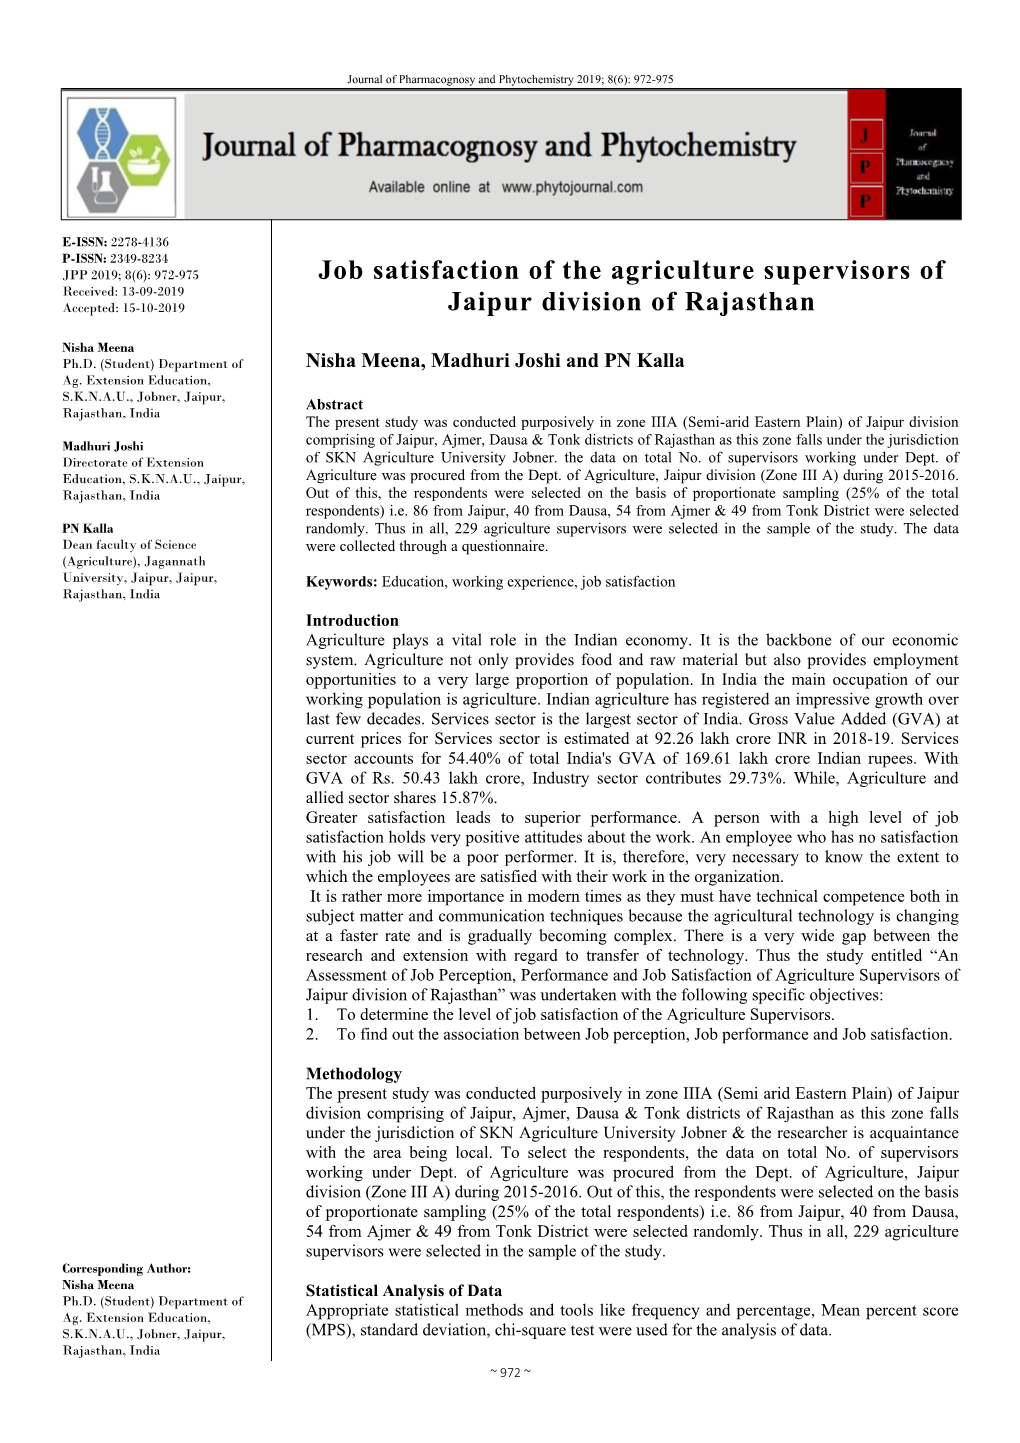 Job Satisfaction of the Agriculture Supervisors of Jaipur Division Of